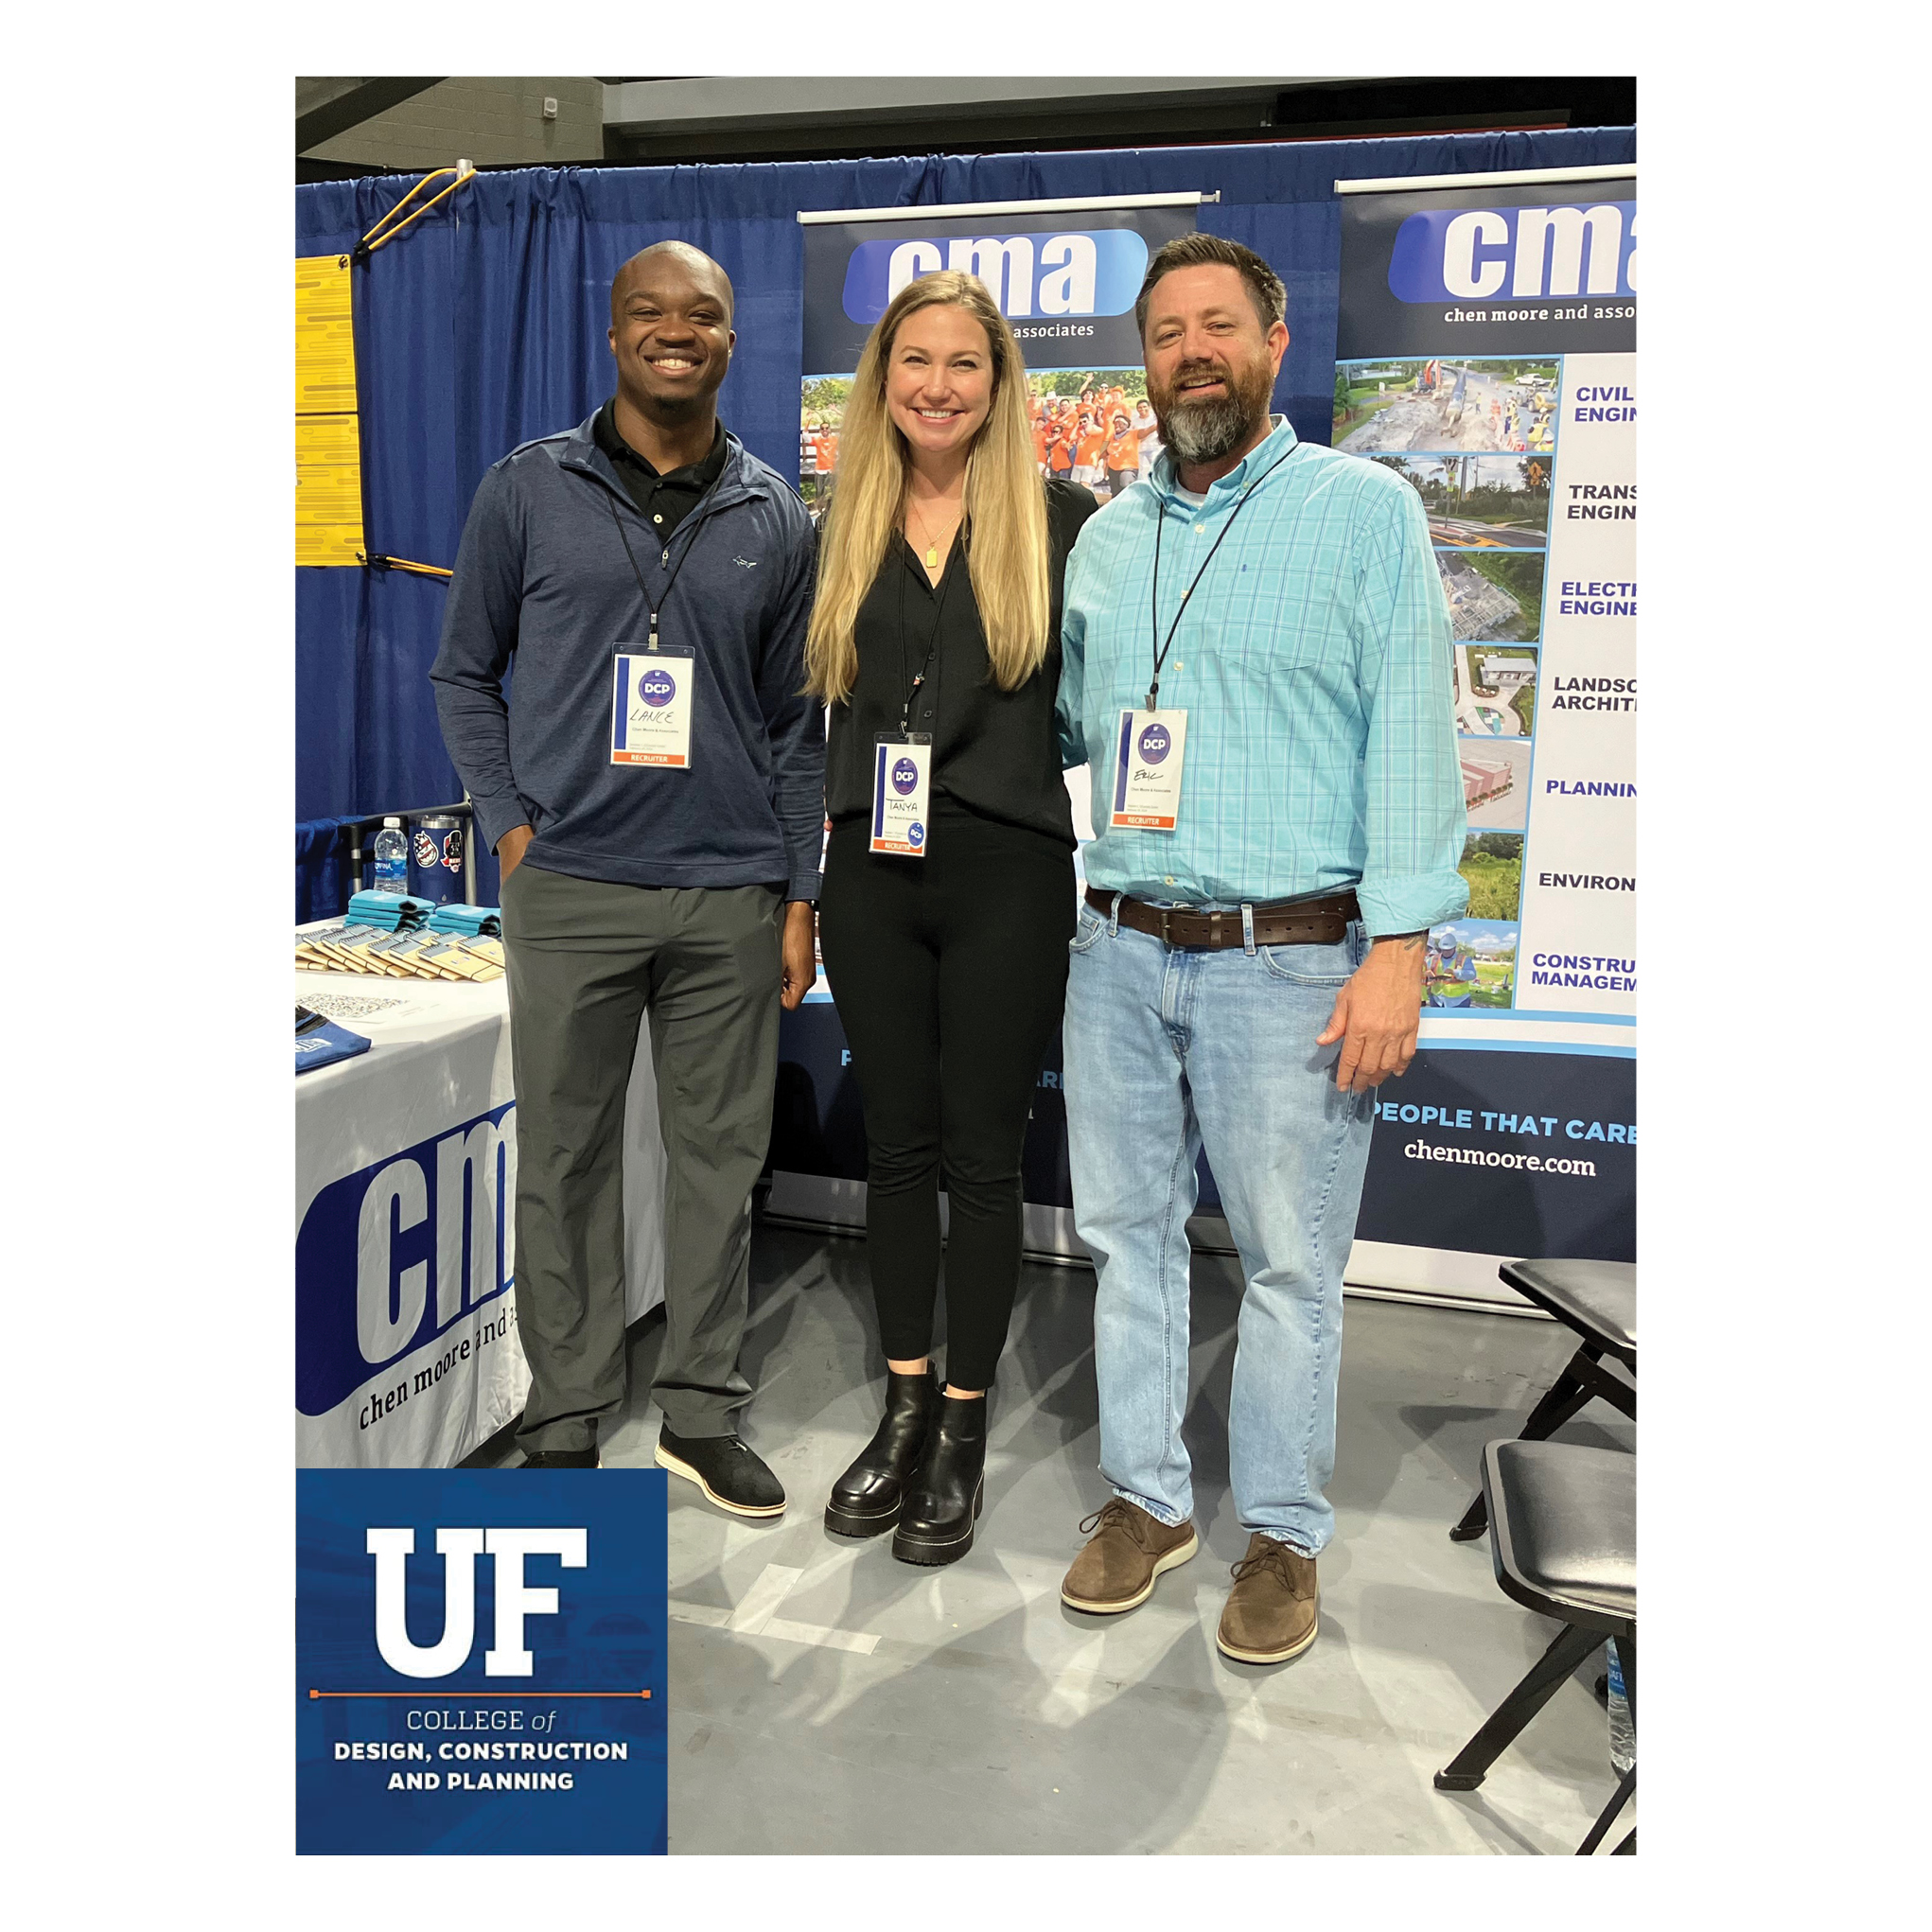 CMA Attended University of Florida College of Design Construction and Planning Career Fair